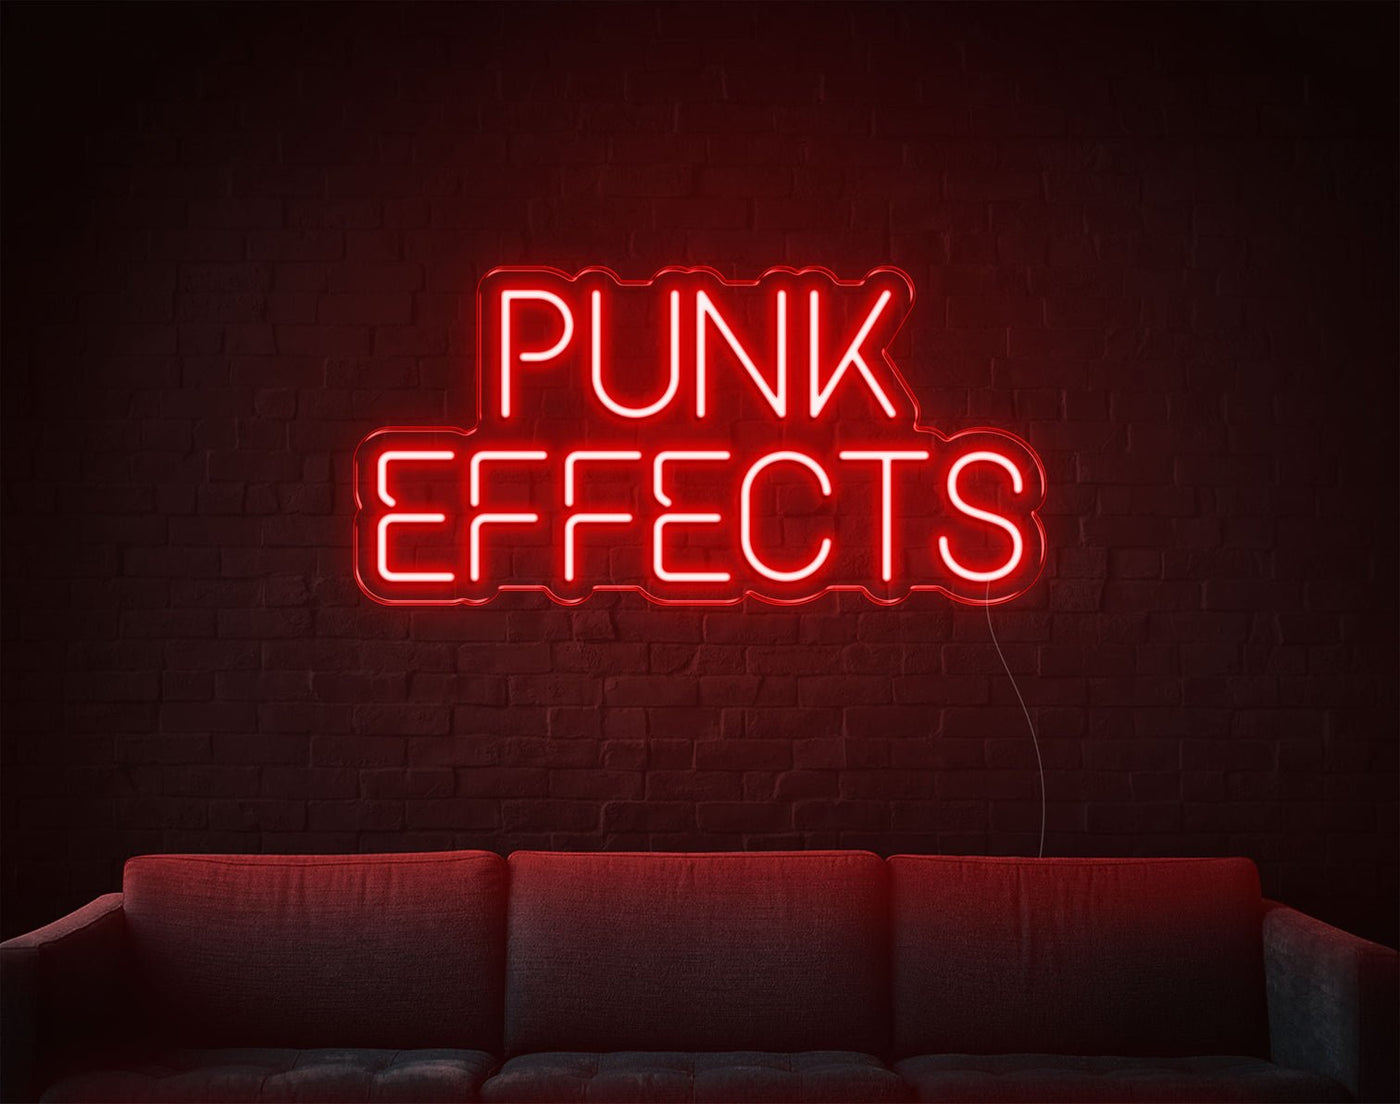 Punk Effects LED Neon Sign - 10inch x 20inchRed